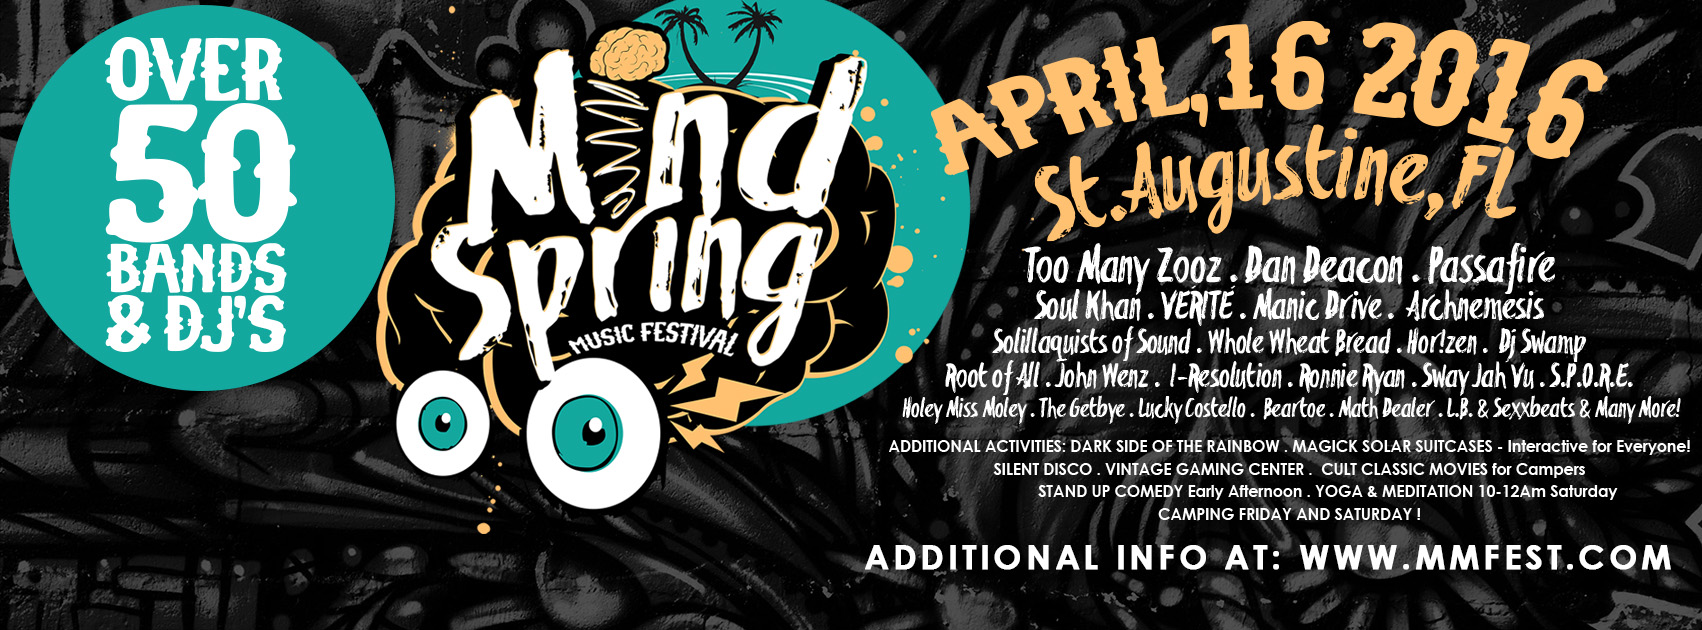 Announcing the MindSpring Music Festival